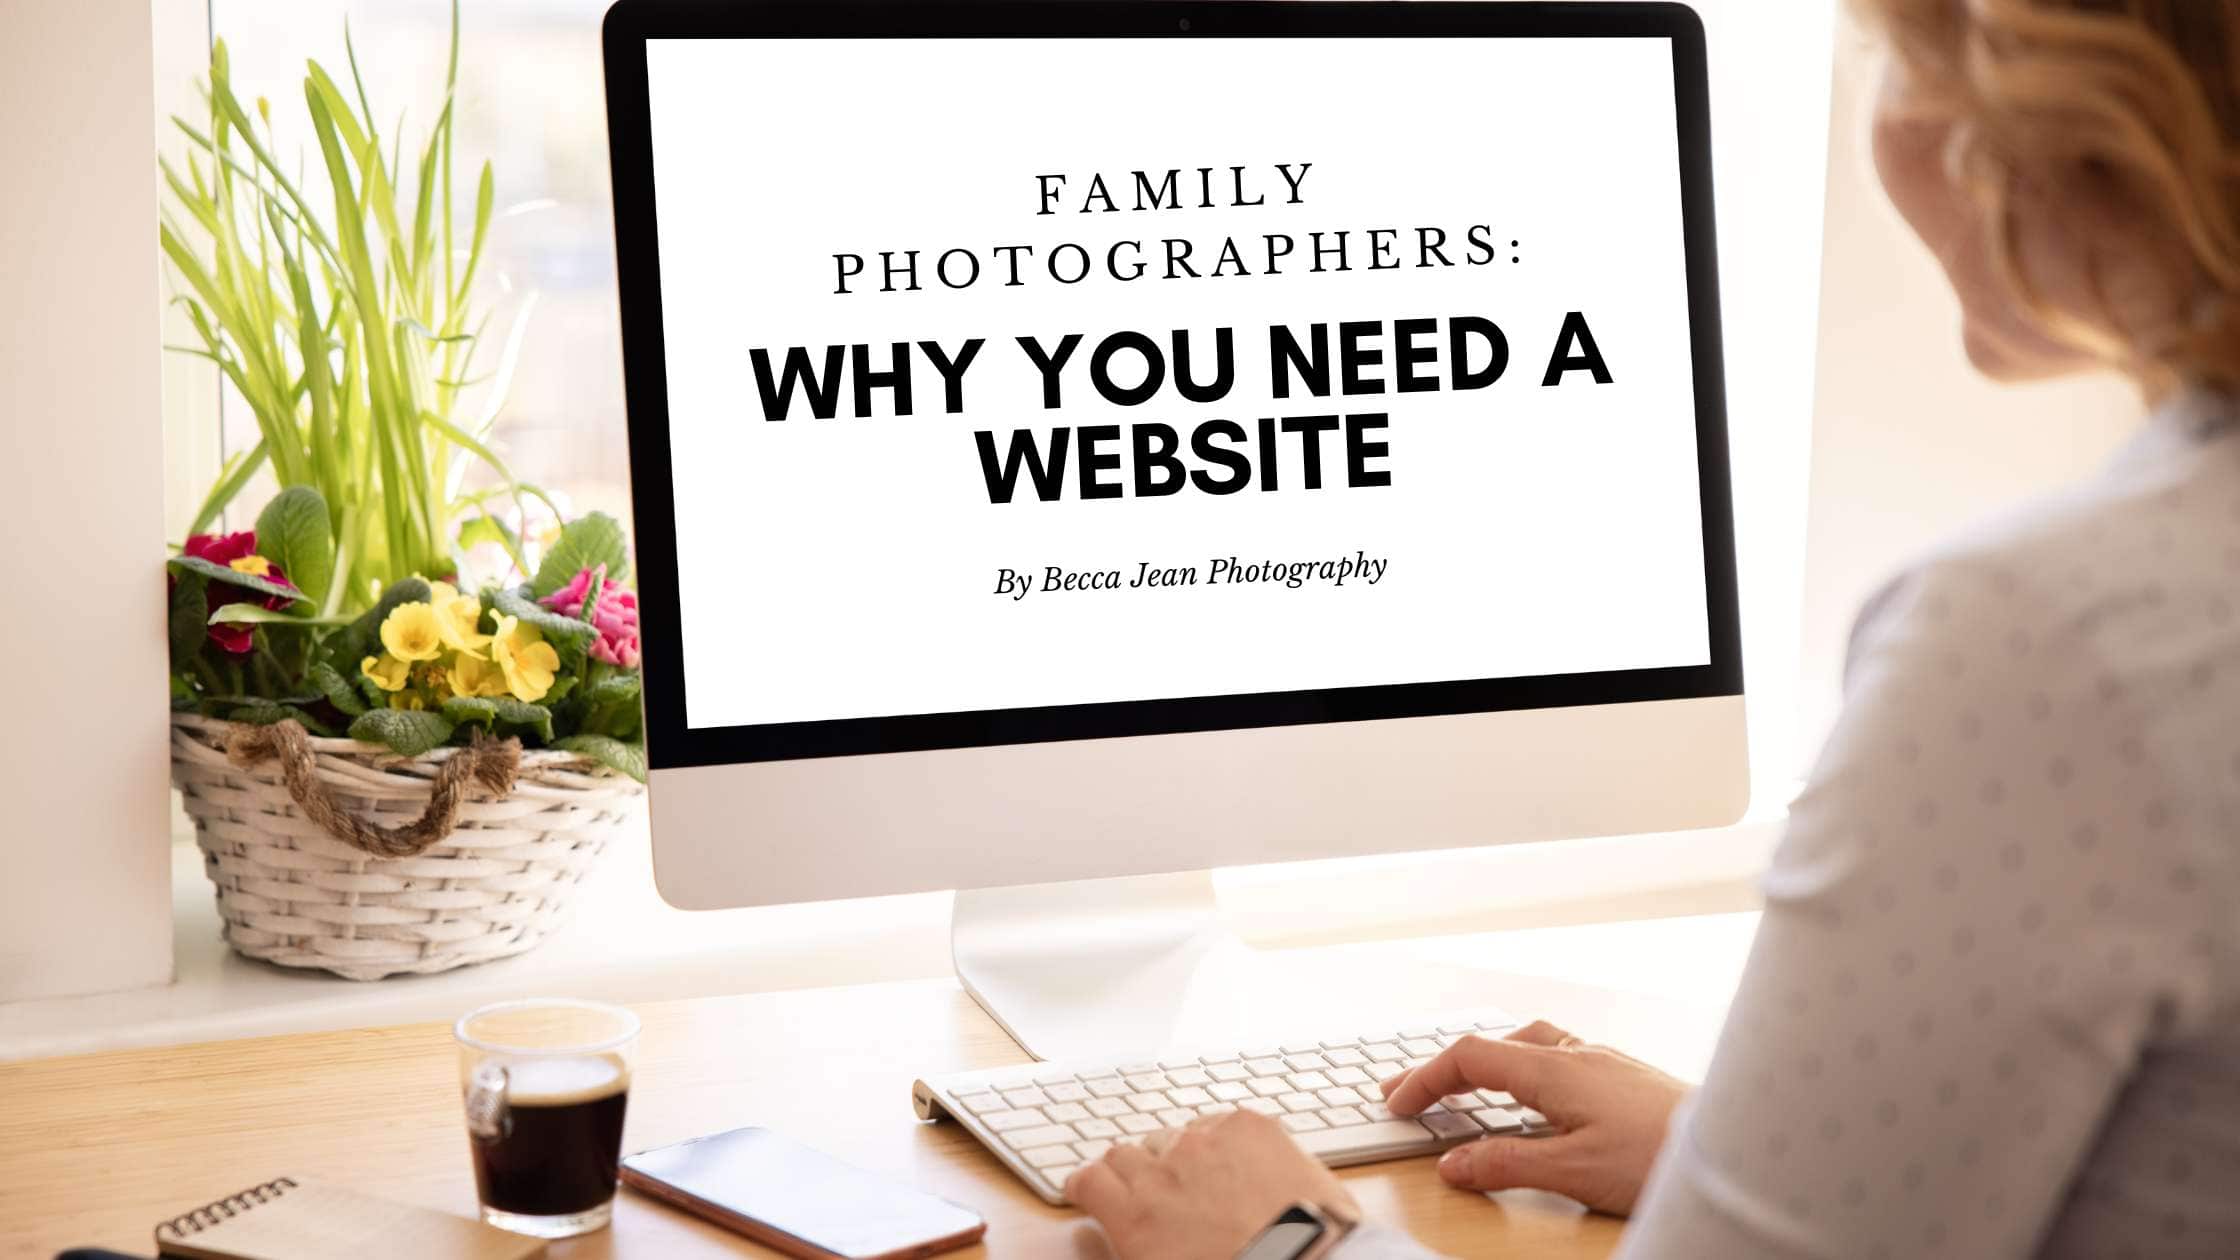 family photographer sitting at a desk working on a computer that says: family photographers - why you need a website